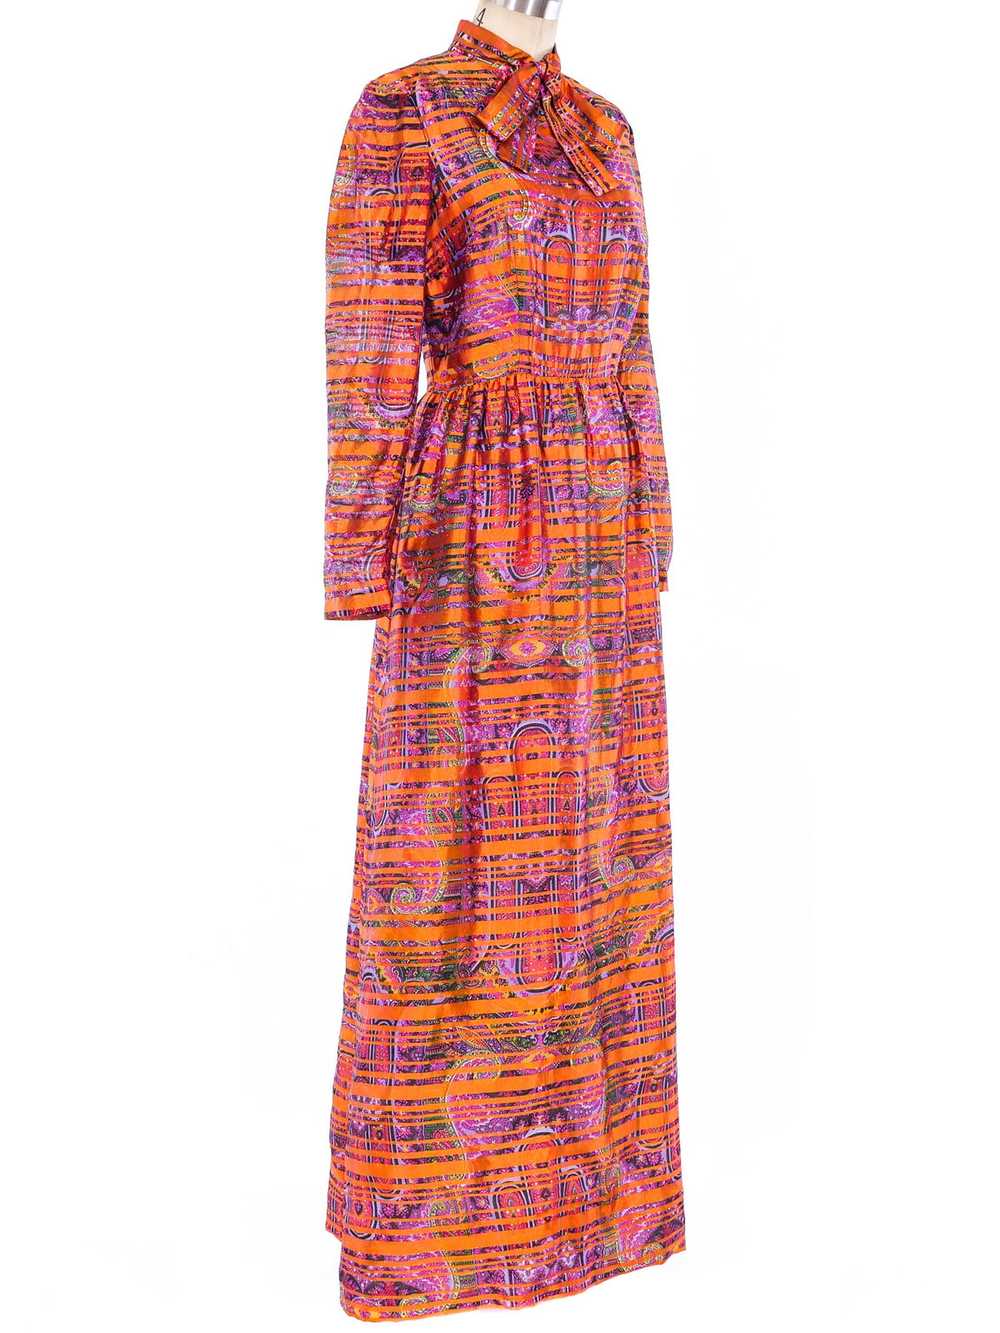 Psychedelic Paisley Printed Striped Dress - image 2